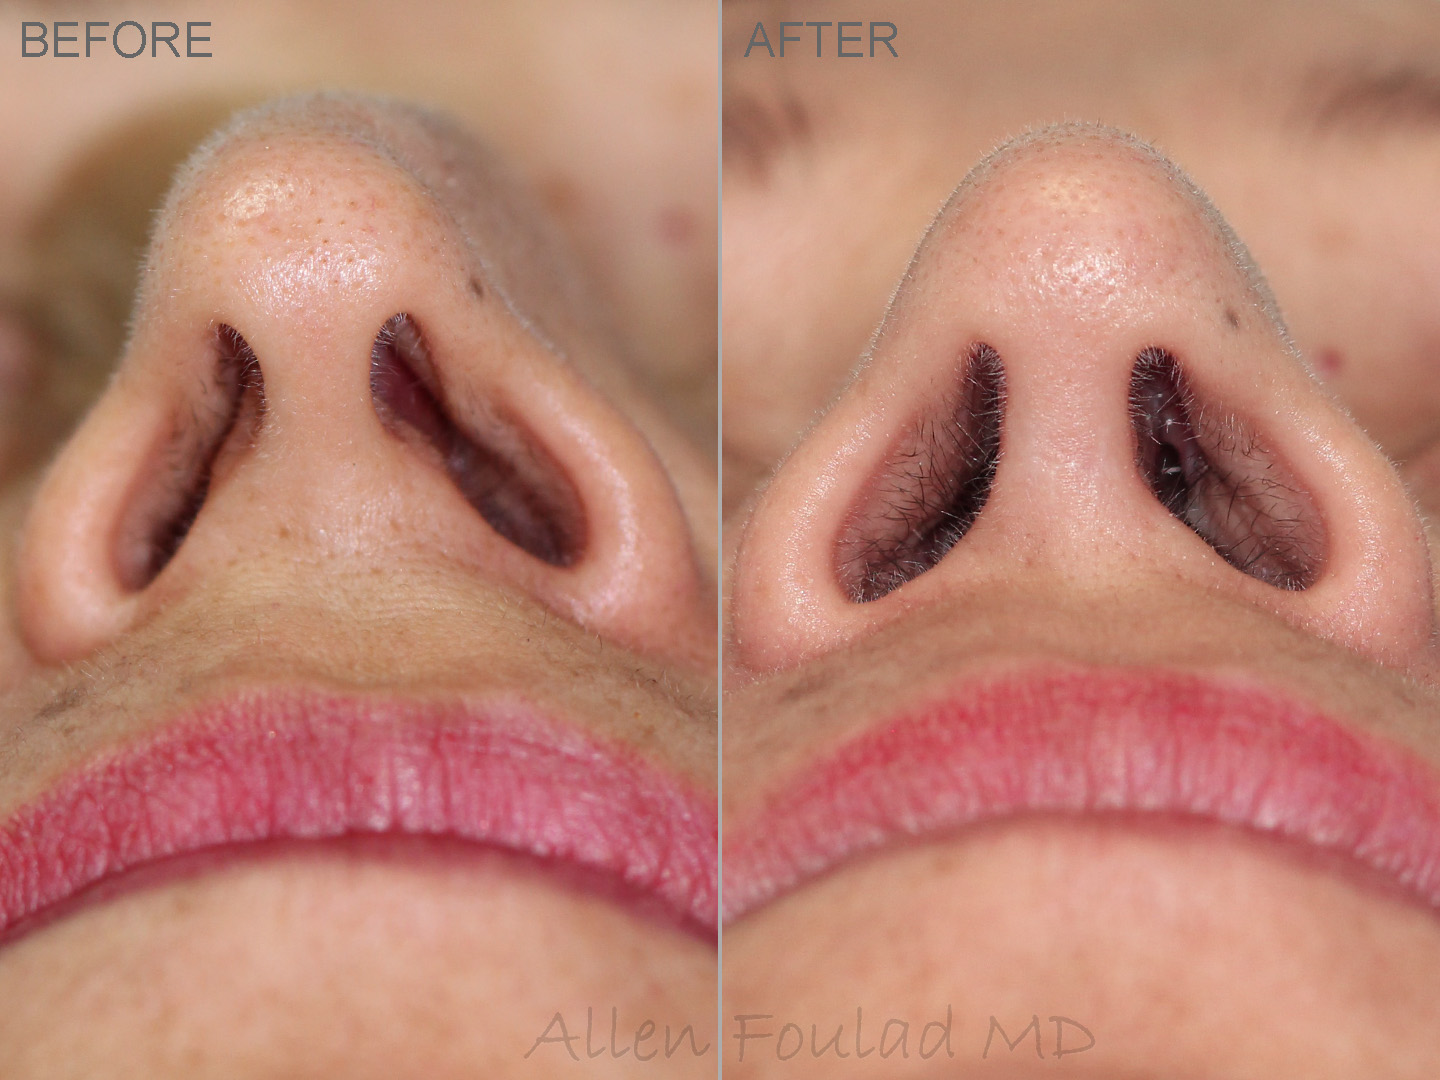 Before and after rhinoplasty and septoplasty. Base view illustrates how much the airway has opened after straightening the nose and septum.